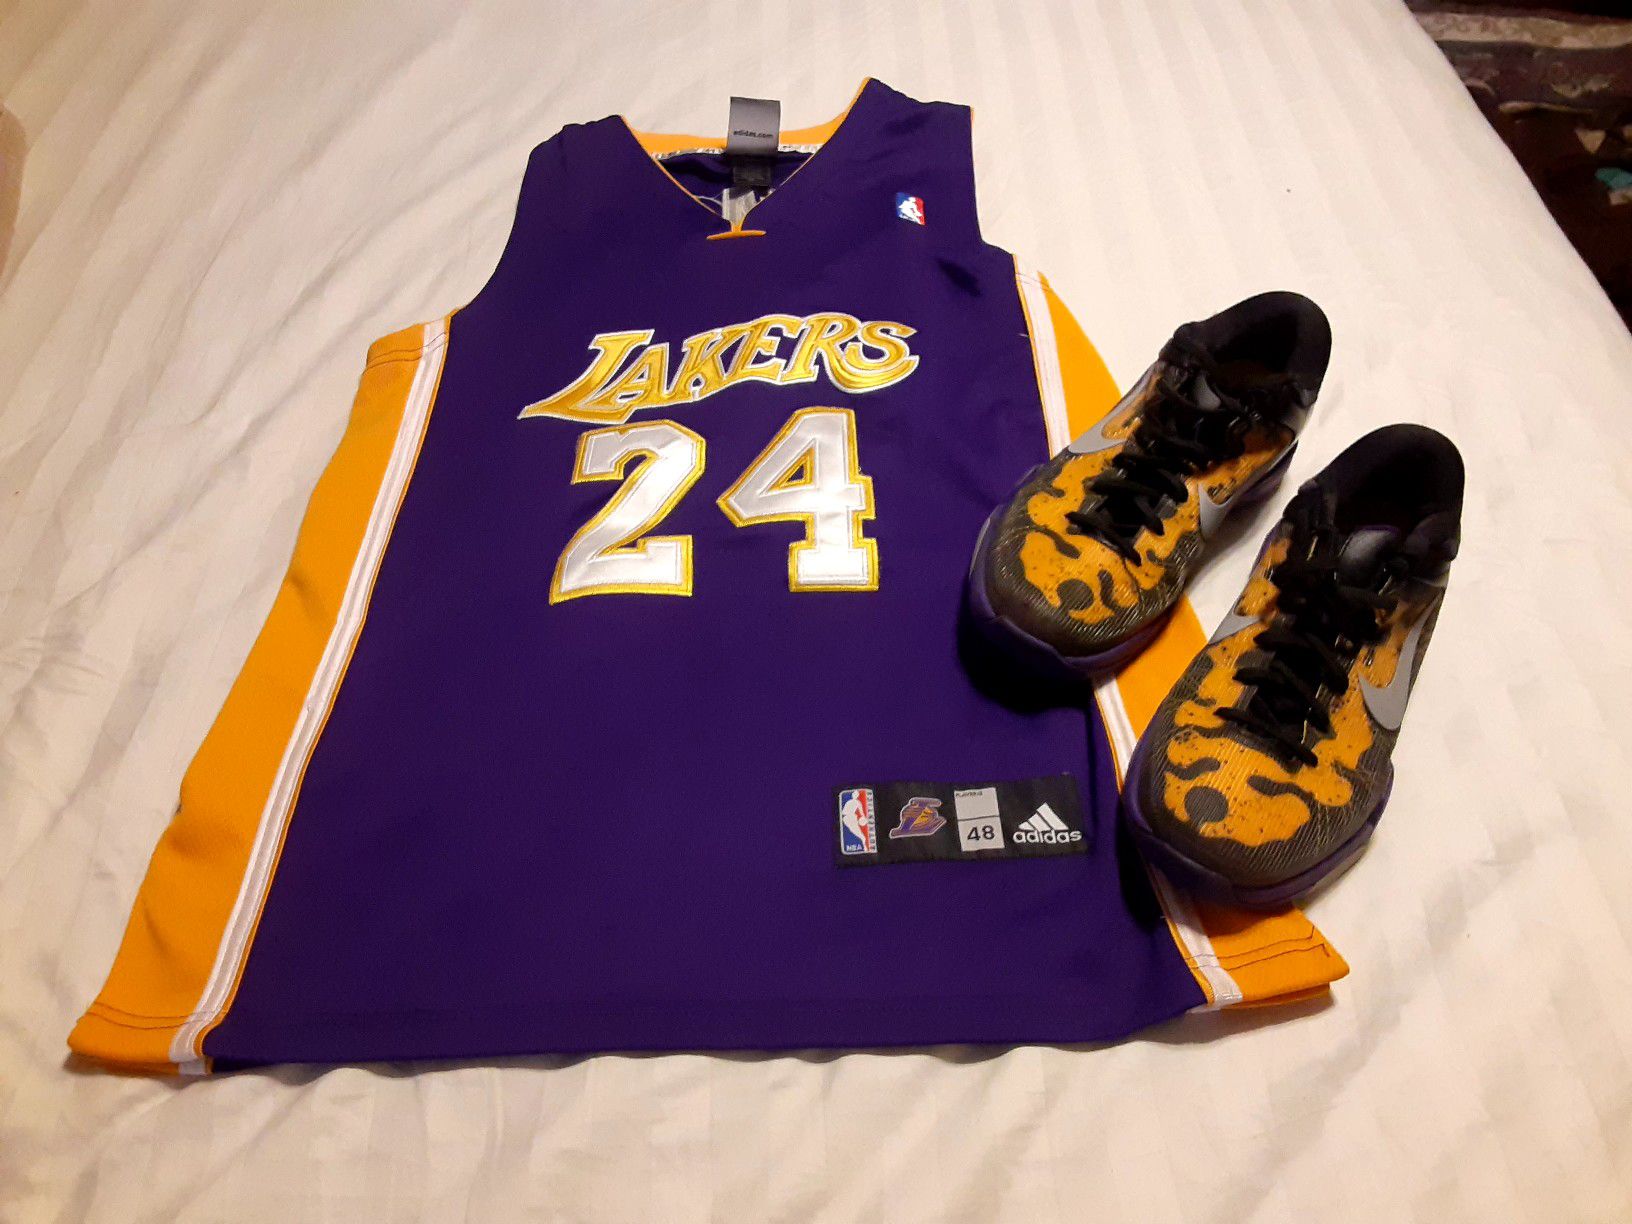 Koby bryant jersey and frog shoes. Make offer